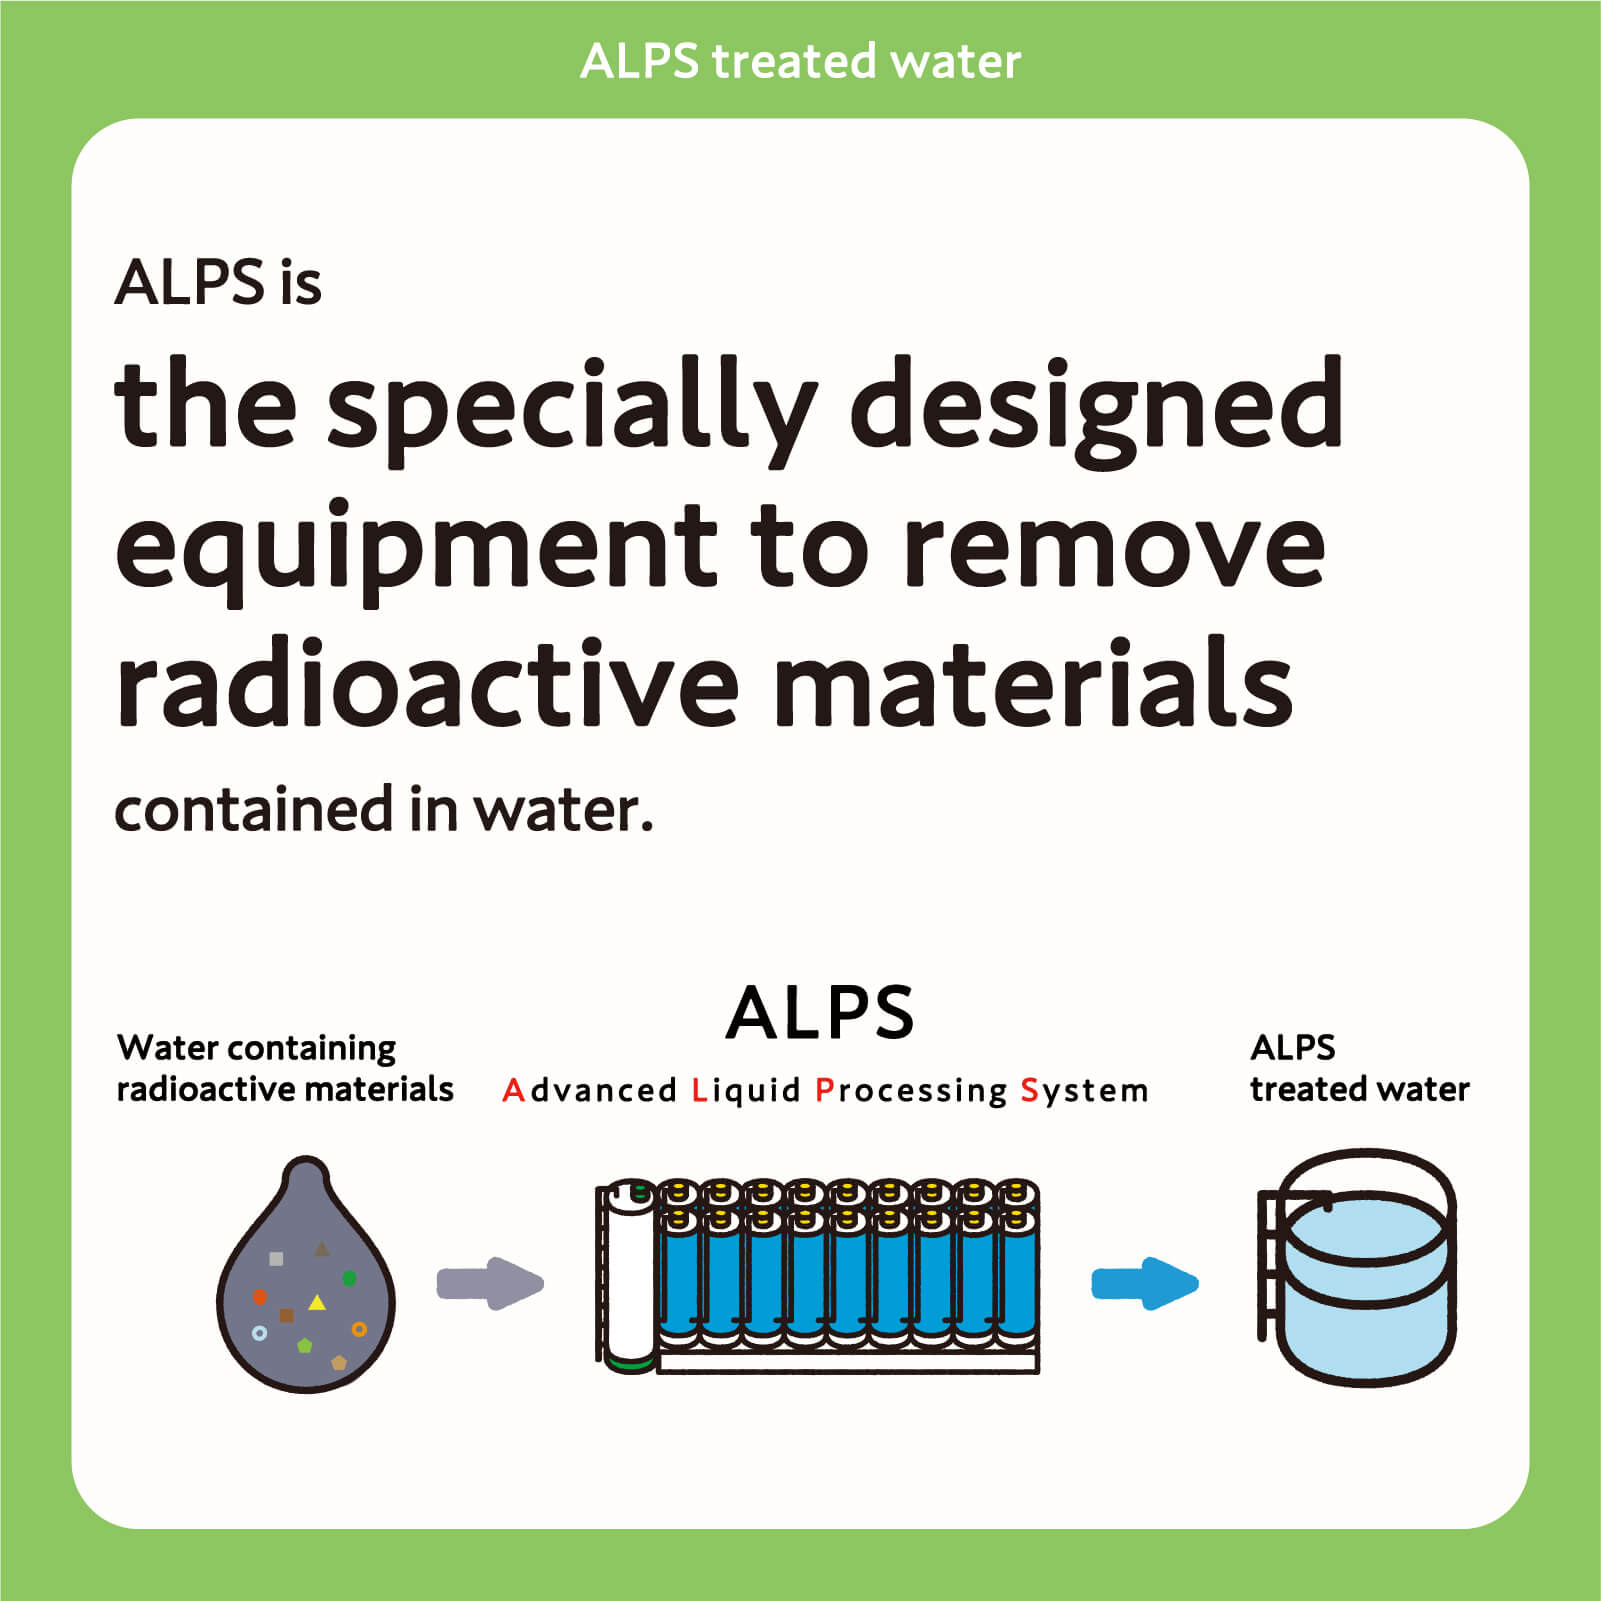 ALPS is the specially designed equipment to remove radioactive materials contained in water.